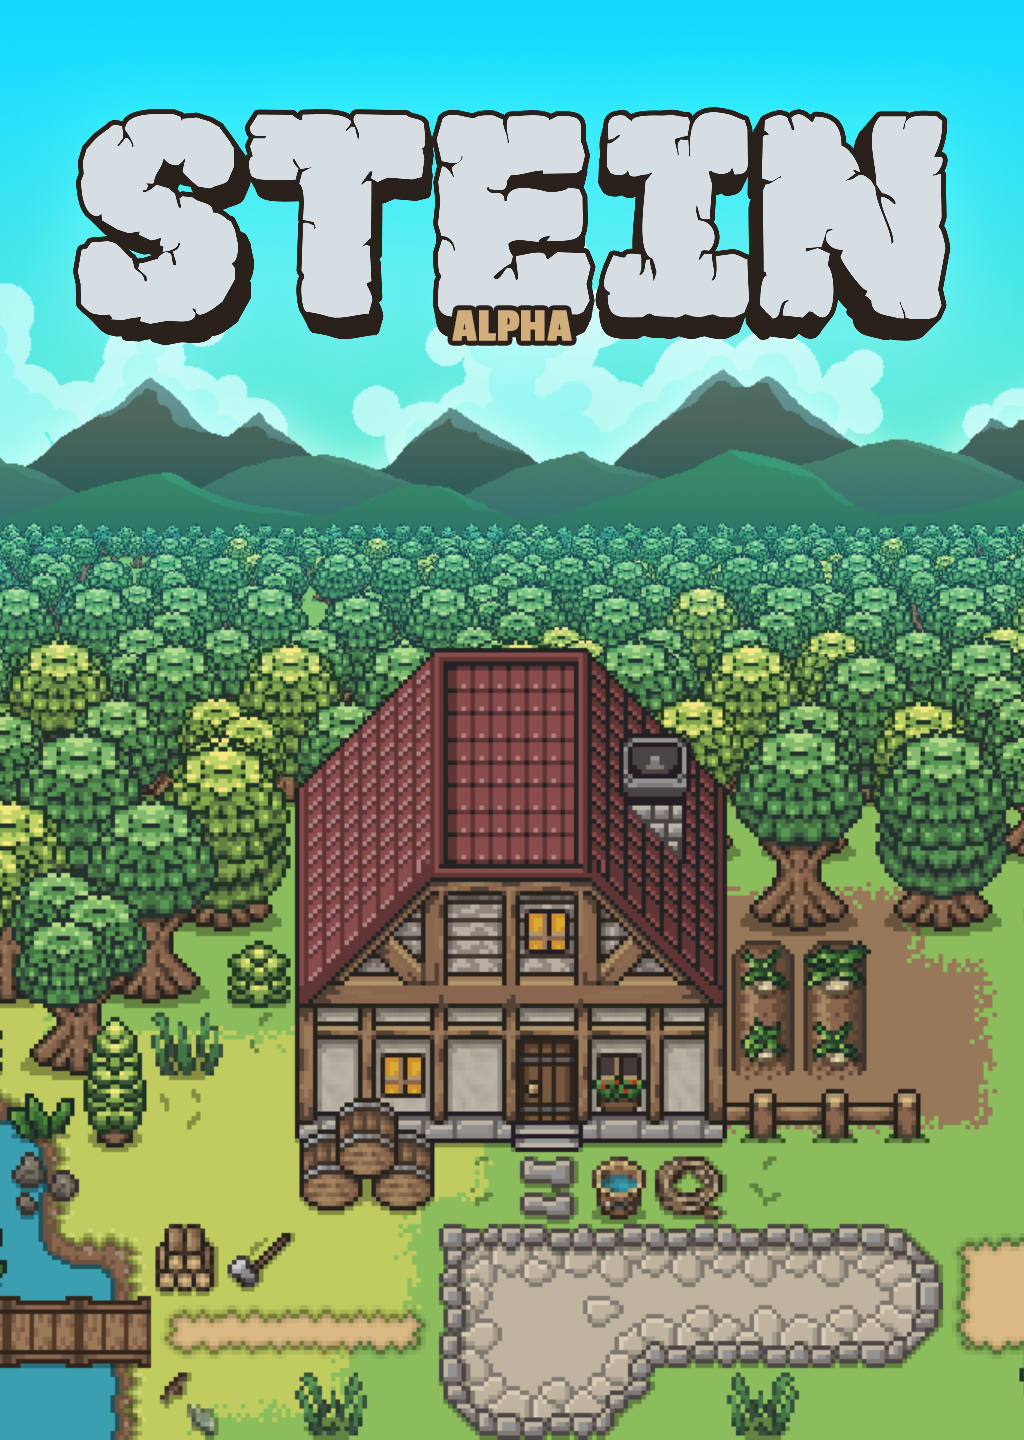 Free To Play Mmorpg Stein World Online Browser Rpg